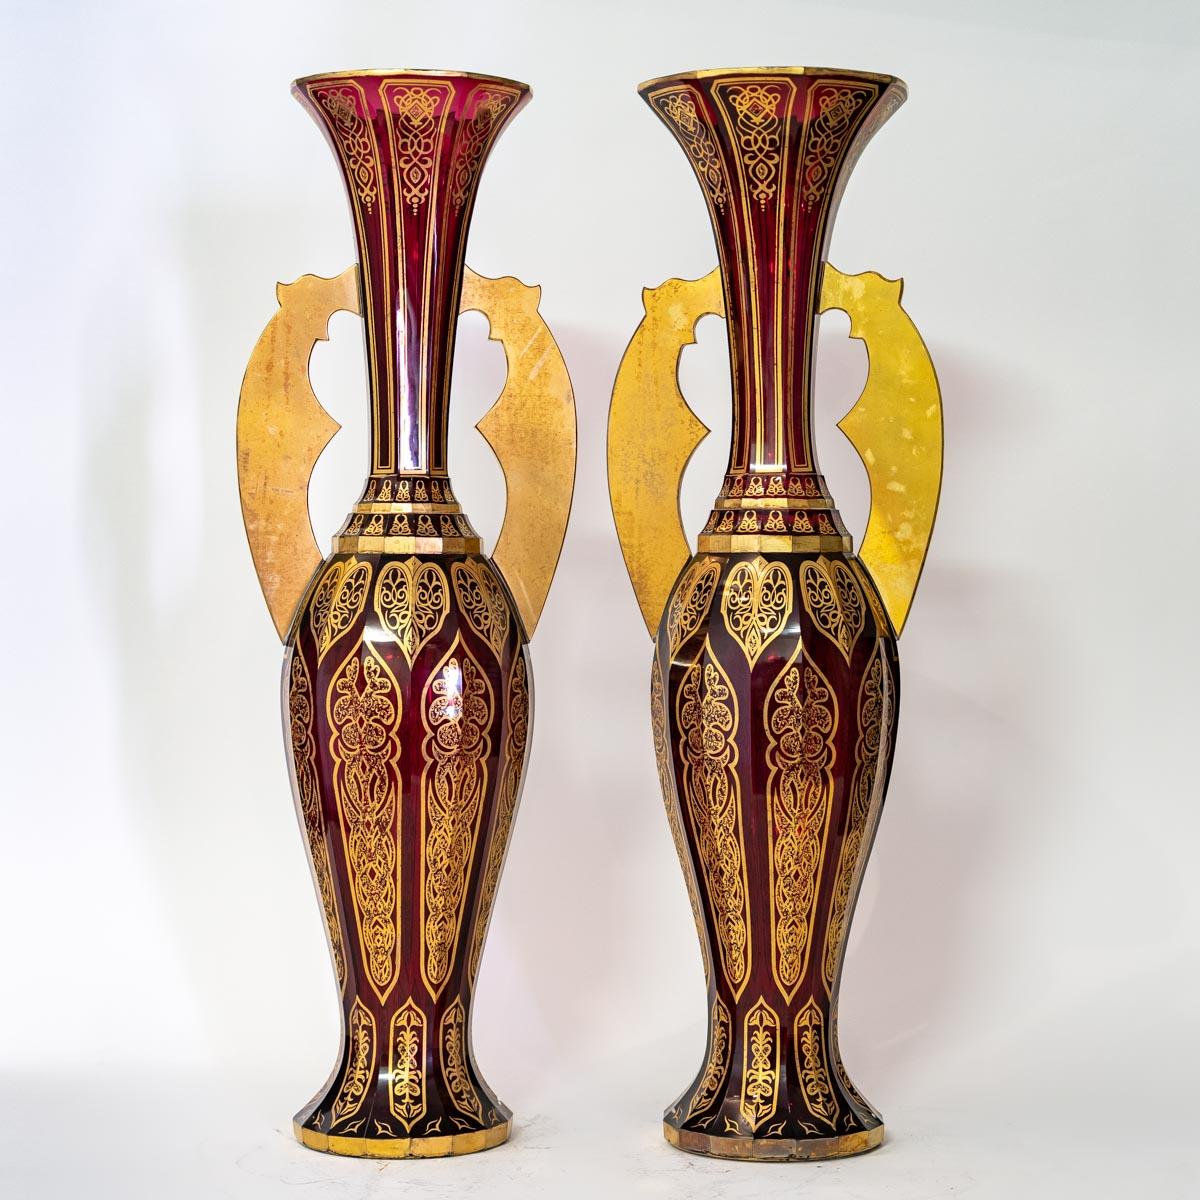 Pair of Bohemian Cut Crystal Vases in Ruby Red and Gold, 19th Century For Sale 3